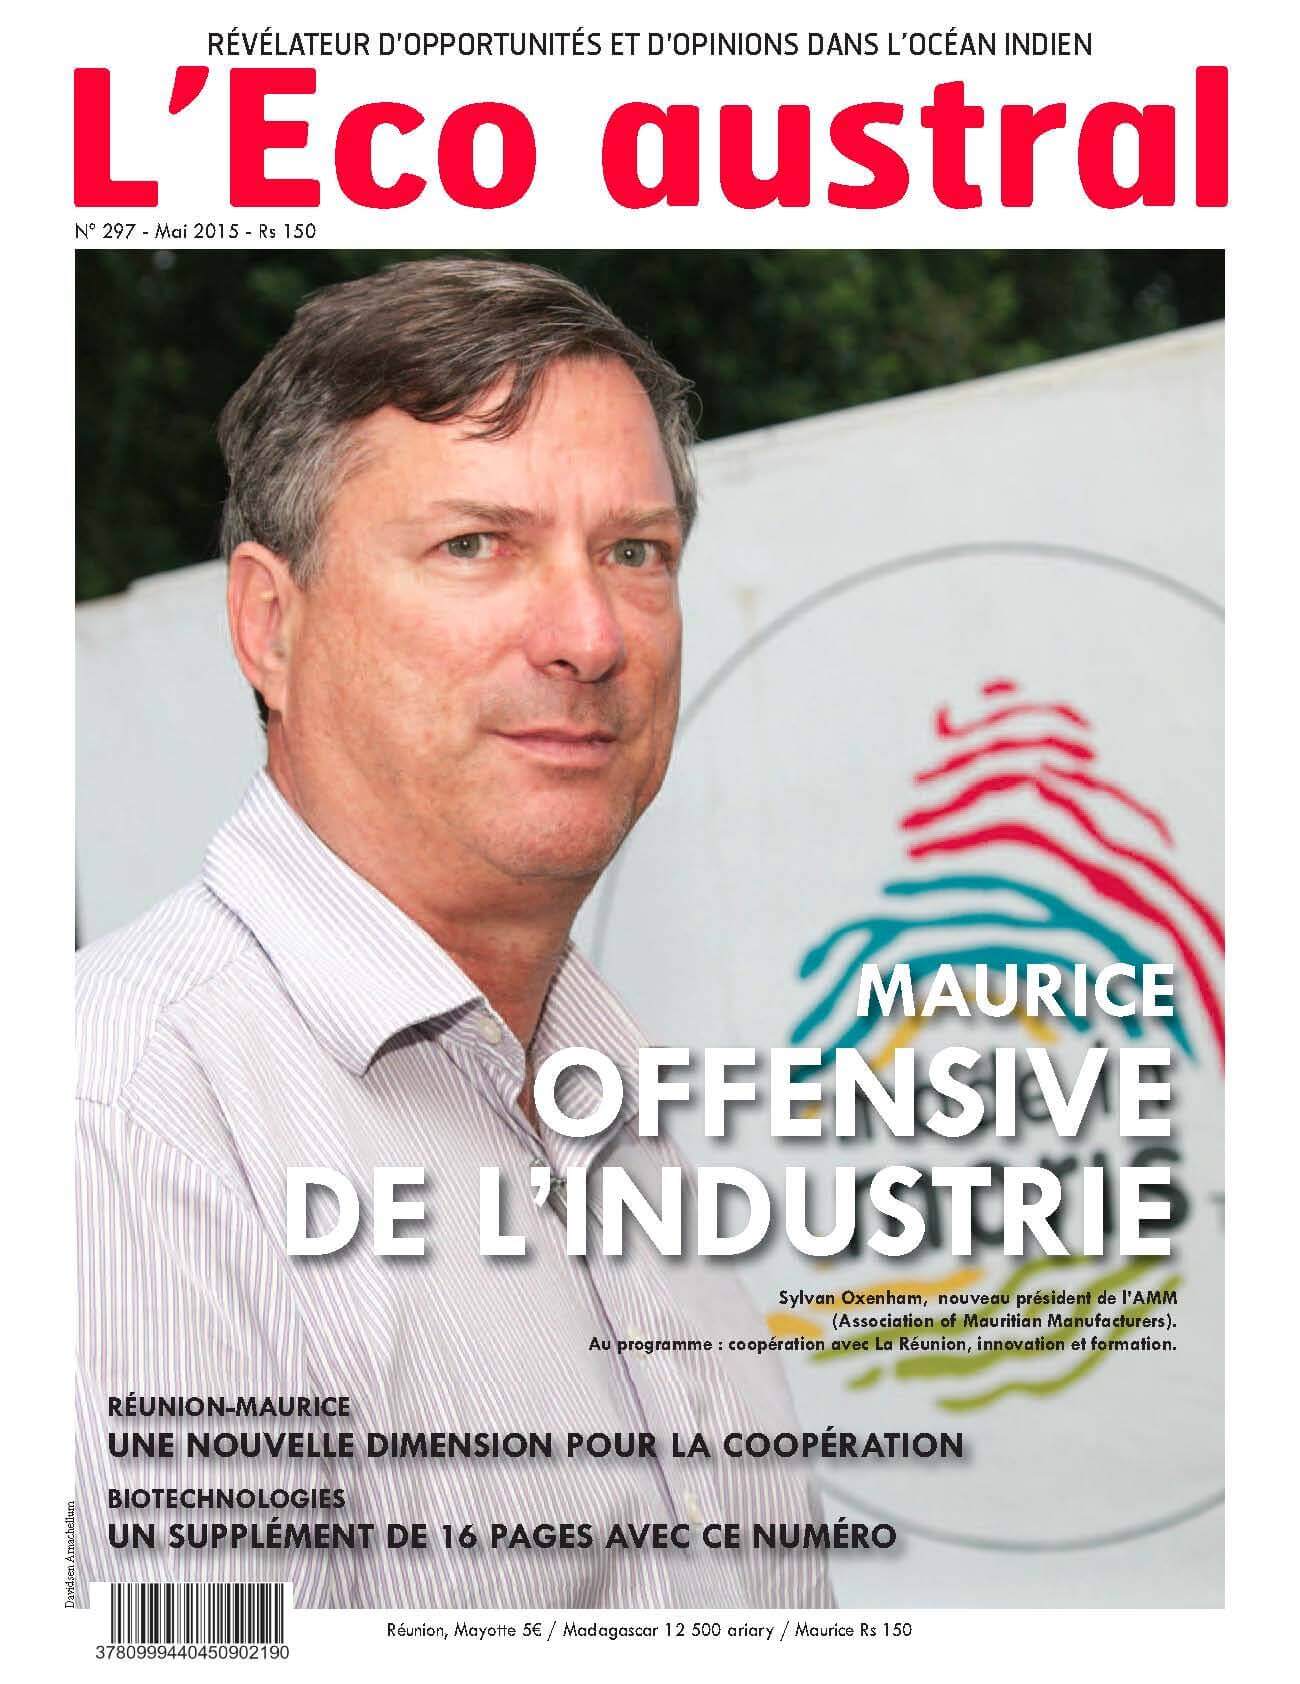 Mauritius Newspapers 16 L Eco Austral